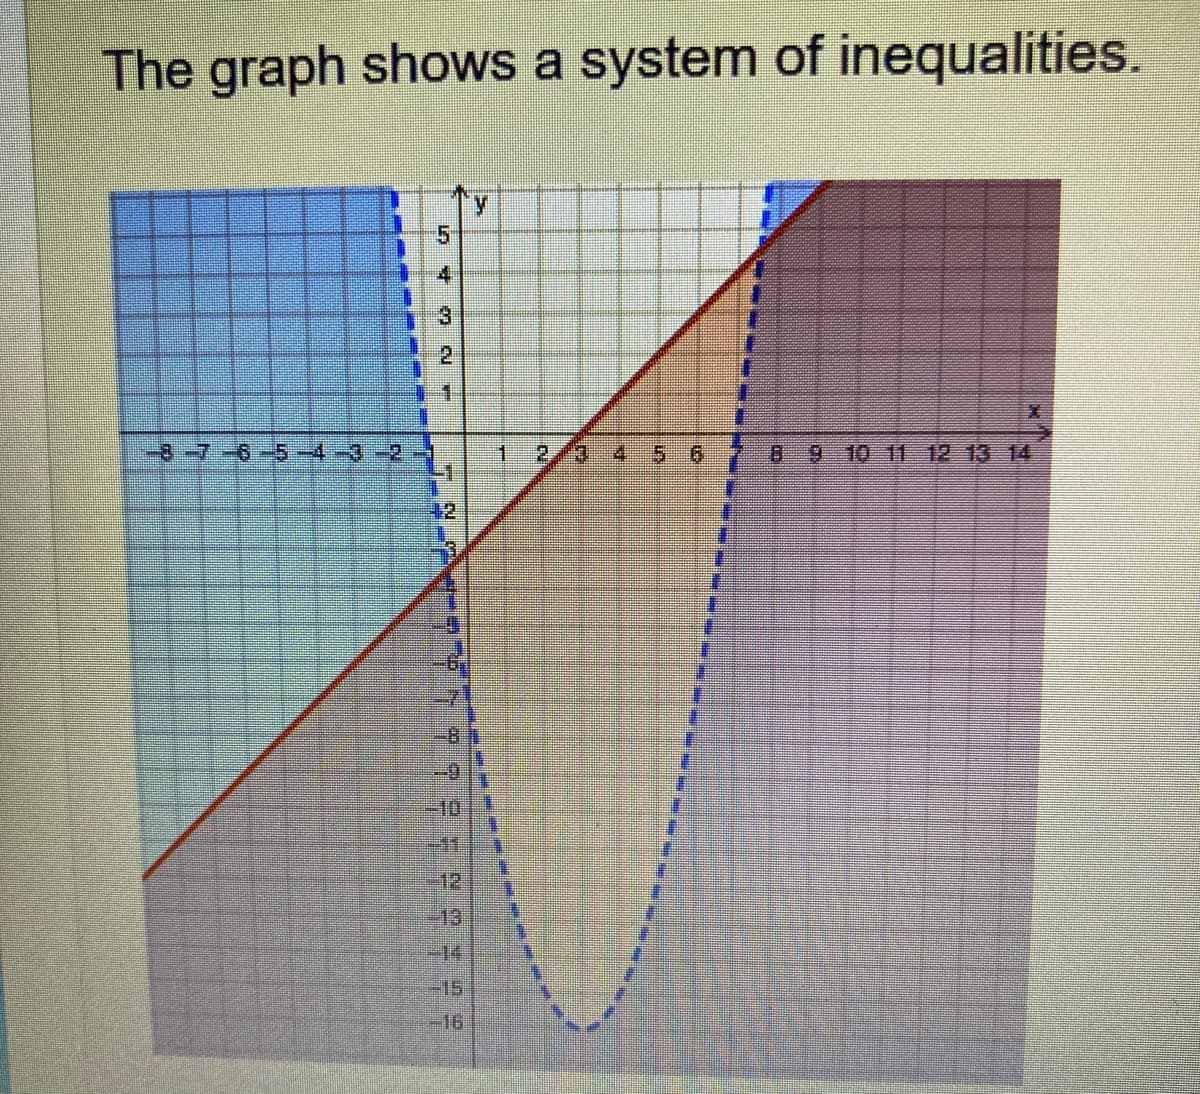 The graph shows a system of inequalities.
y
1
-8-7-6-5-4-3-2-
9 10 11 12 13 14
11
54
ro co
2
4
-10
#11
13
-15
-16
II
DU
C
4
5 6
તે જ સમ
TE
B